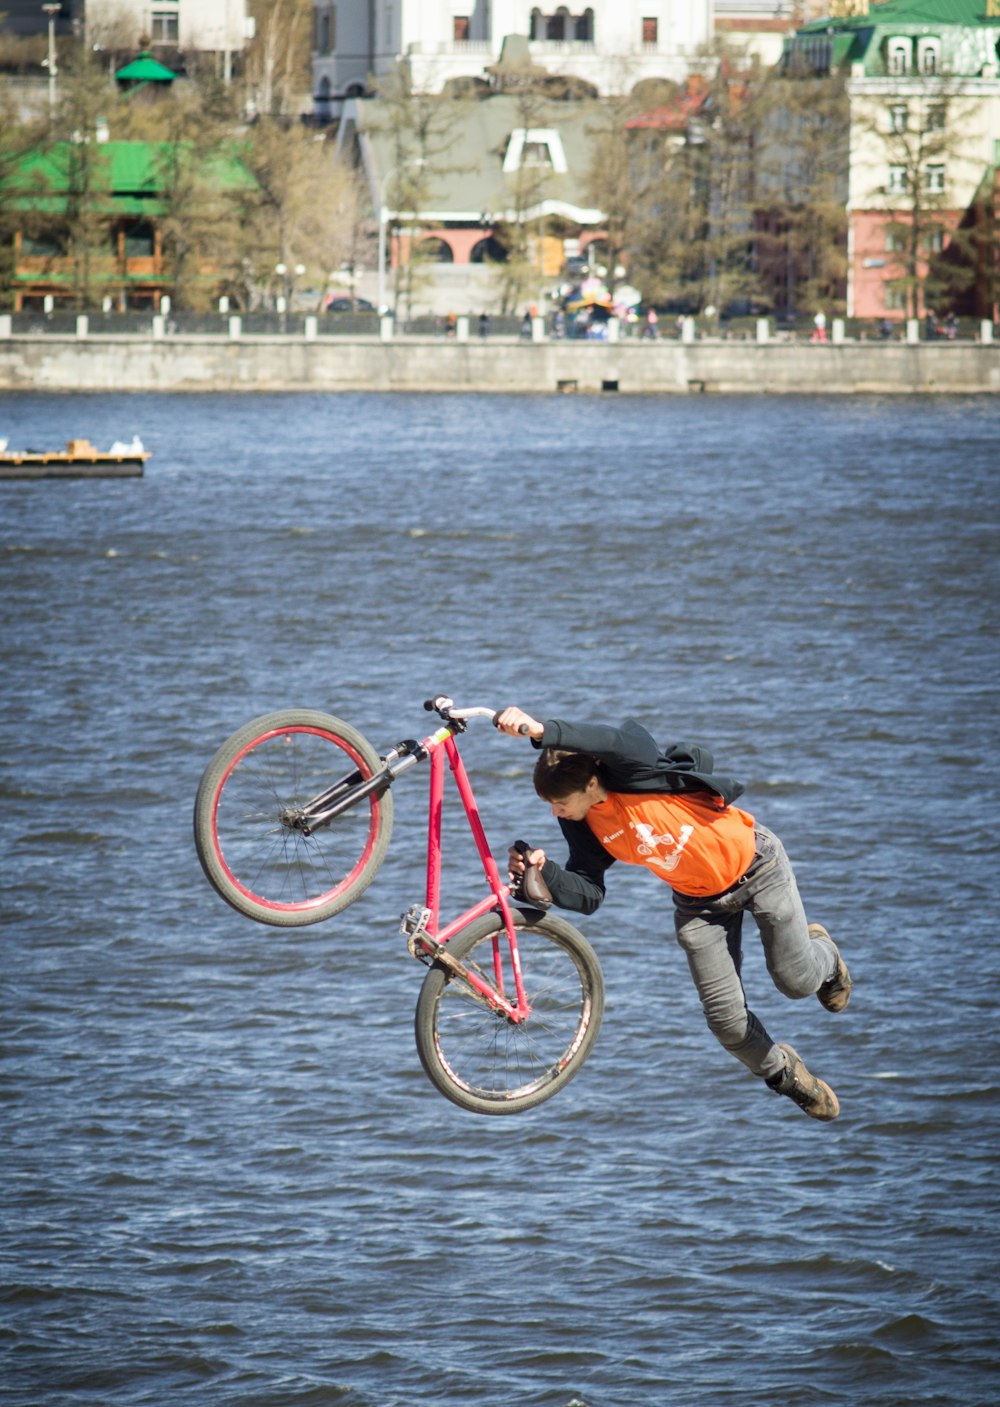 man in orange jacket and gray pants riding on red bicycle on body of water during